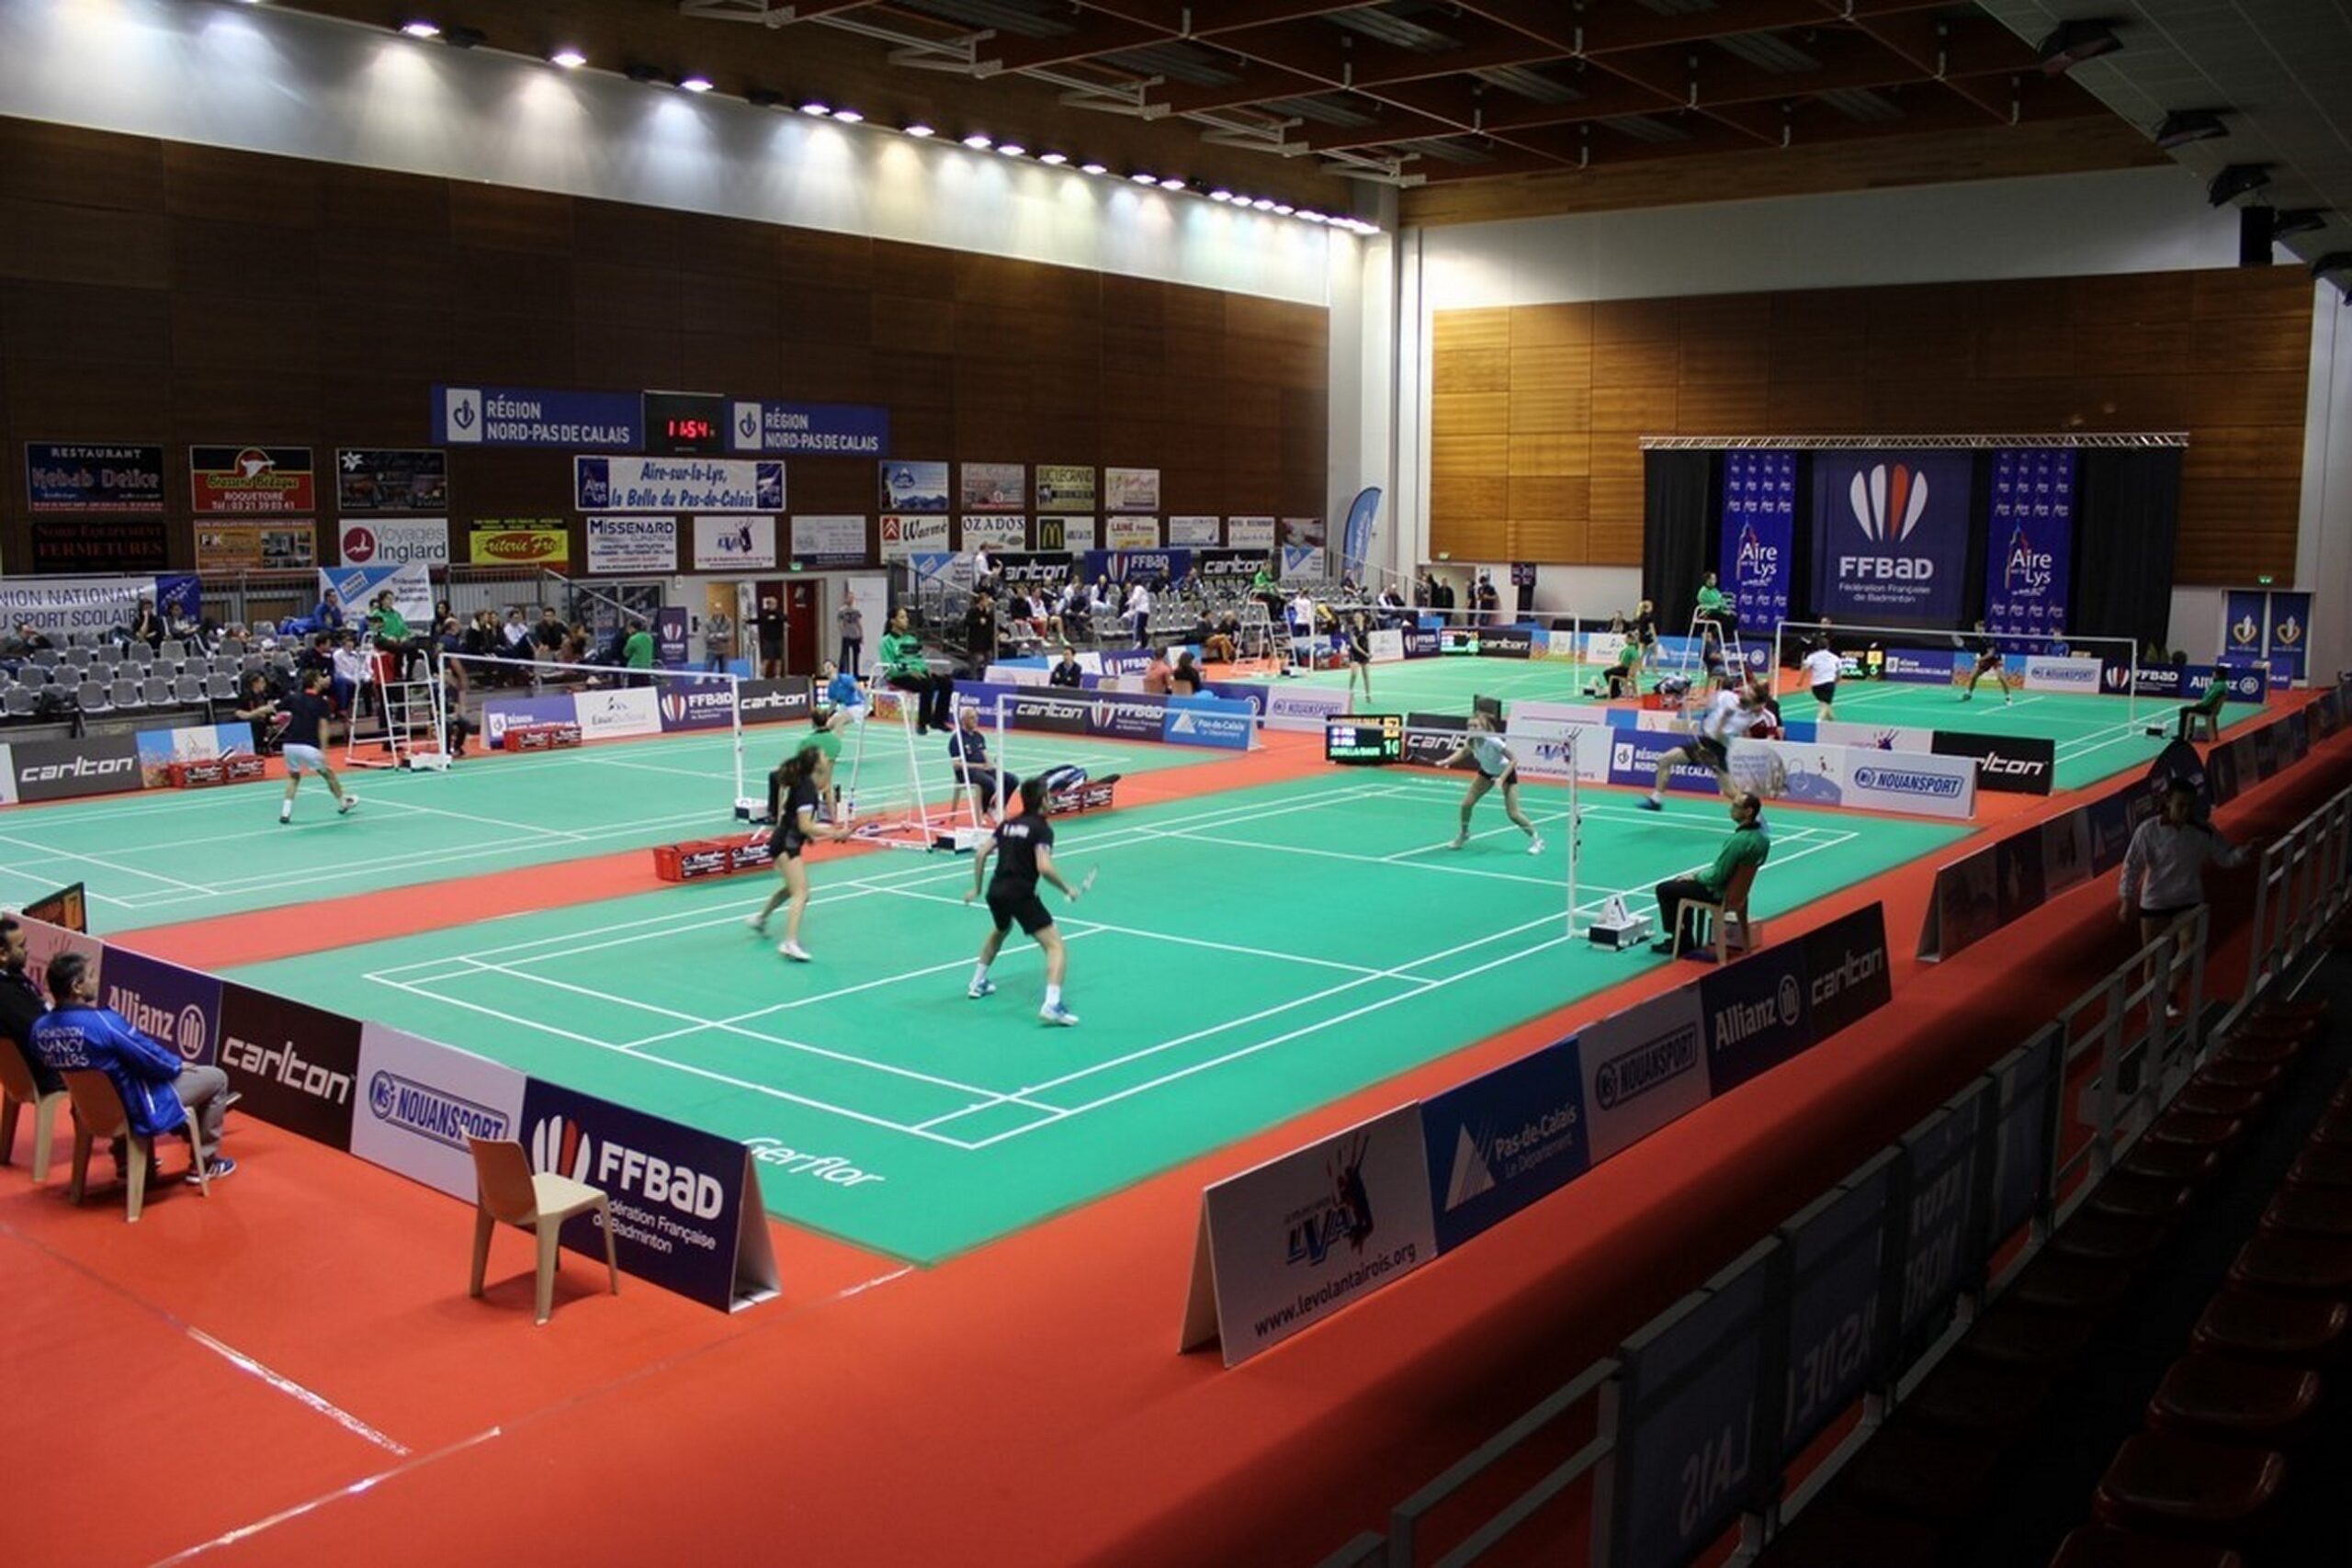 Where can you play badminton in Paris and the Ile-de-France region